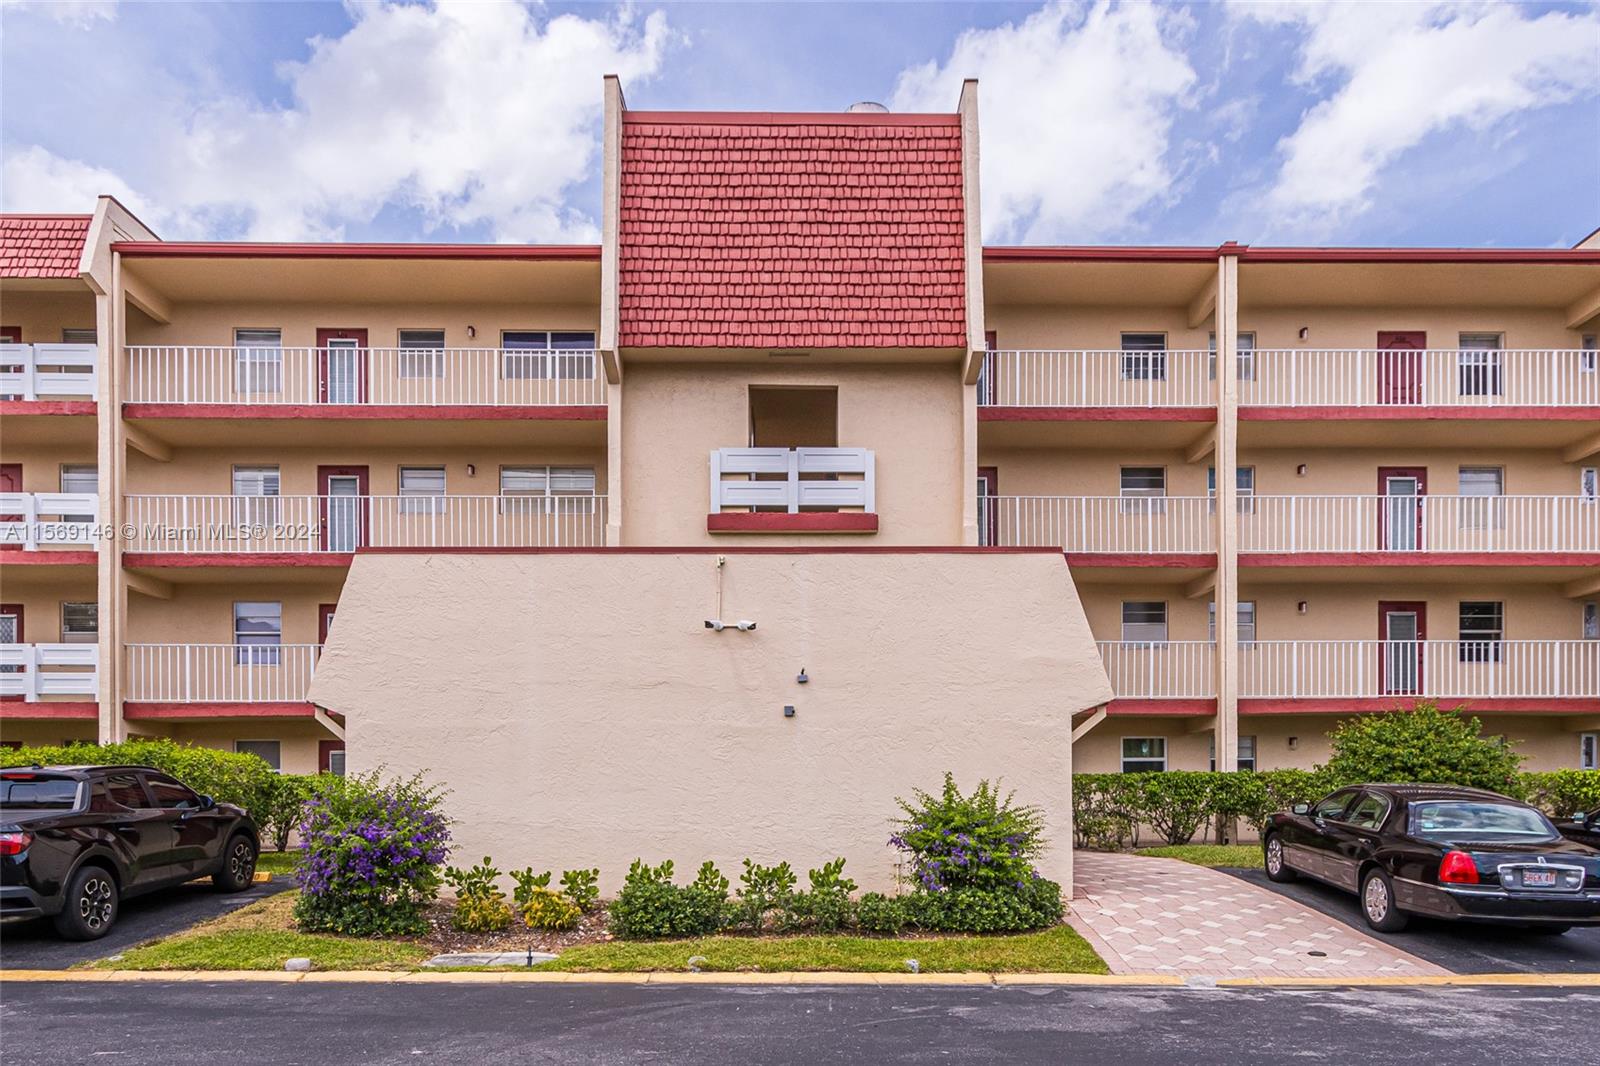 1010 Country Club Dr 205, Margate, Florida 33063, 1 Bedroom Bedrooms, ,1 BathroomBathrooms,Residential,For Sale,1010 Country Club Dr 205,A11569146